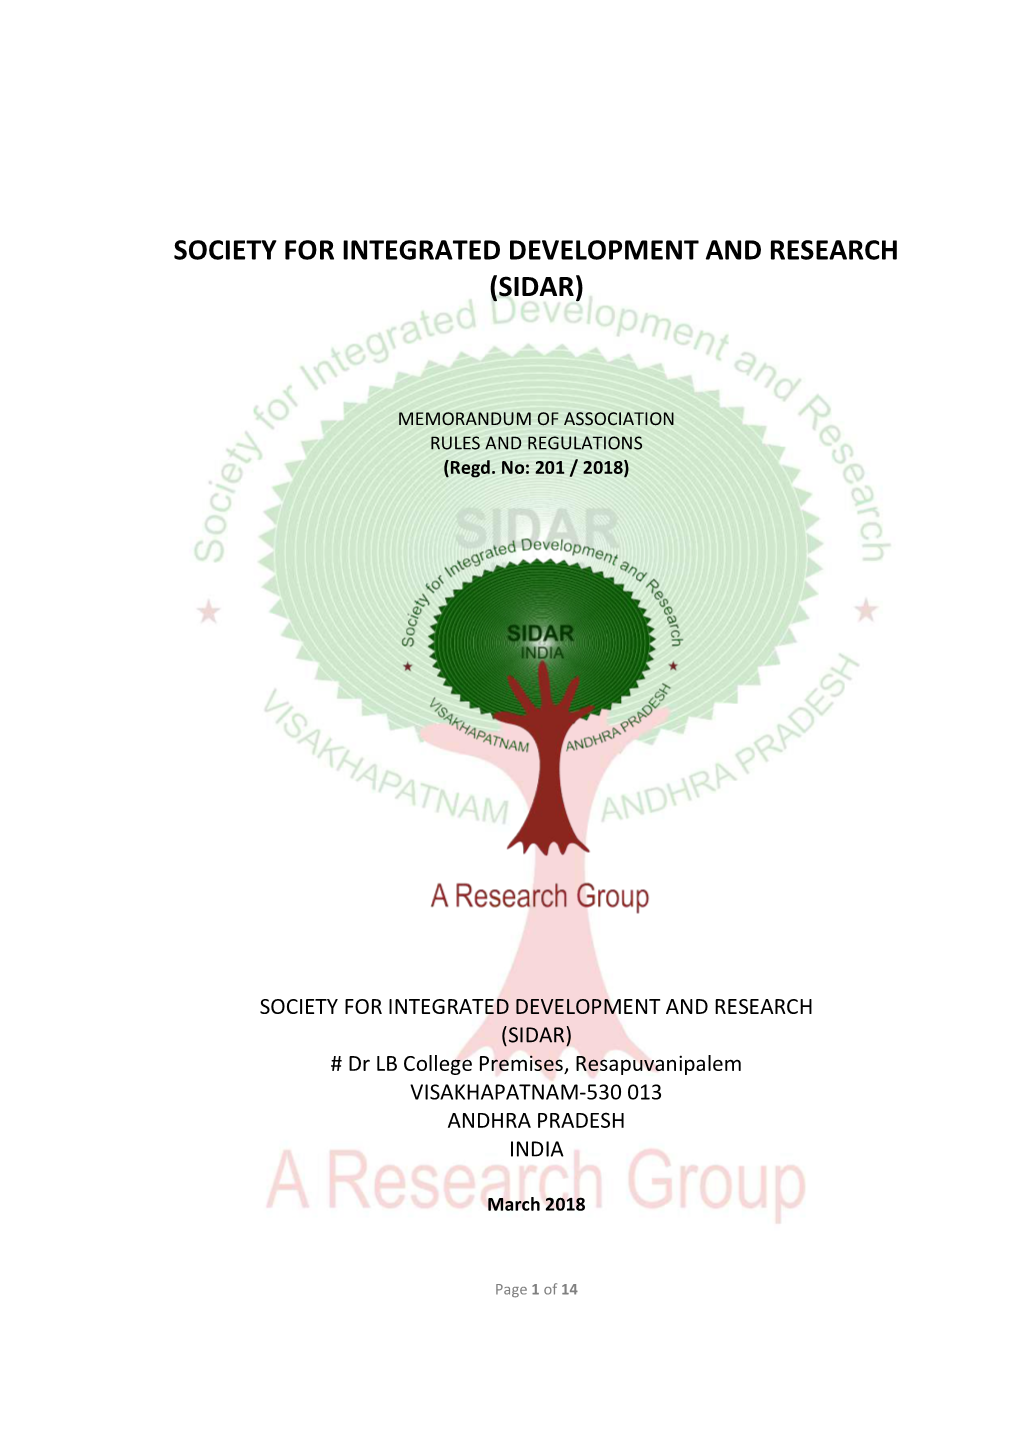 Society for Integrated Development and Research (Sidar)